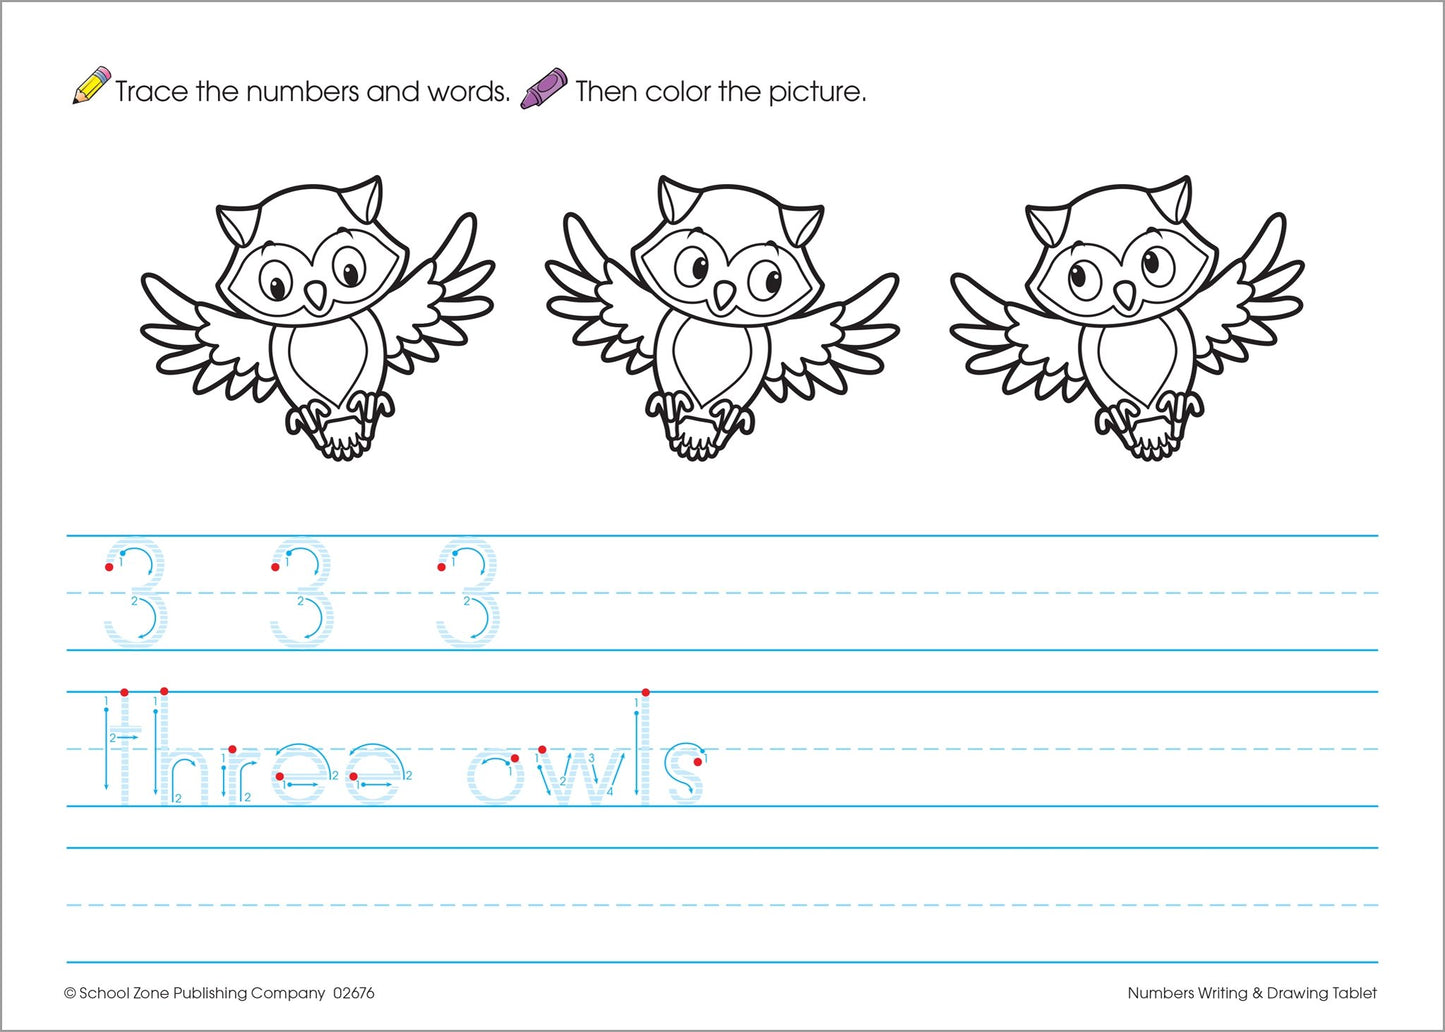 Numbers Writing & Drawing Tablet Workbook - 96 Pages, Ages 3 to 7, Preschool, Kindergarten, 1st Grade, Numbers 1-20, Tracing, Printing